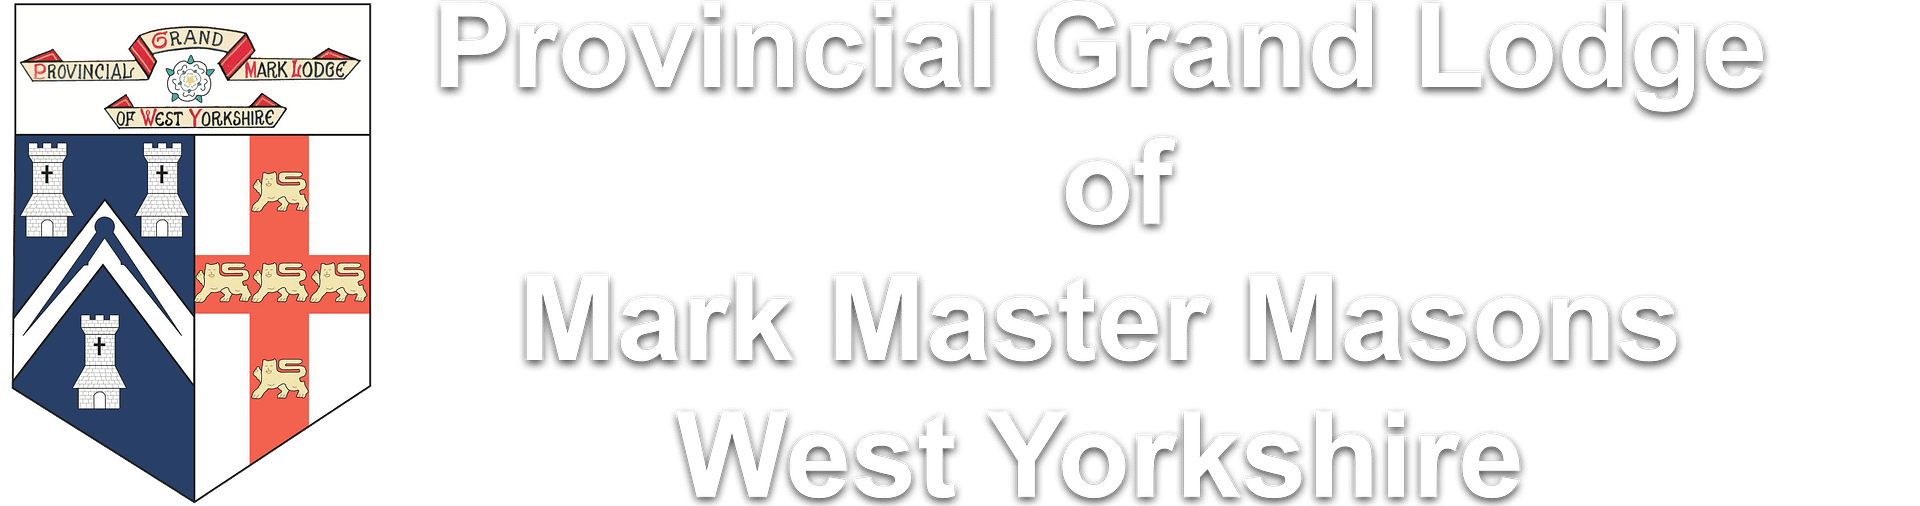 Provincial Grand Lodge of Mark Master Masons West Yorkshire